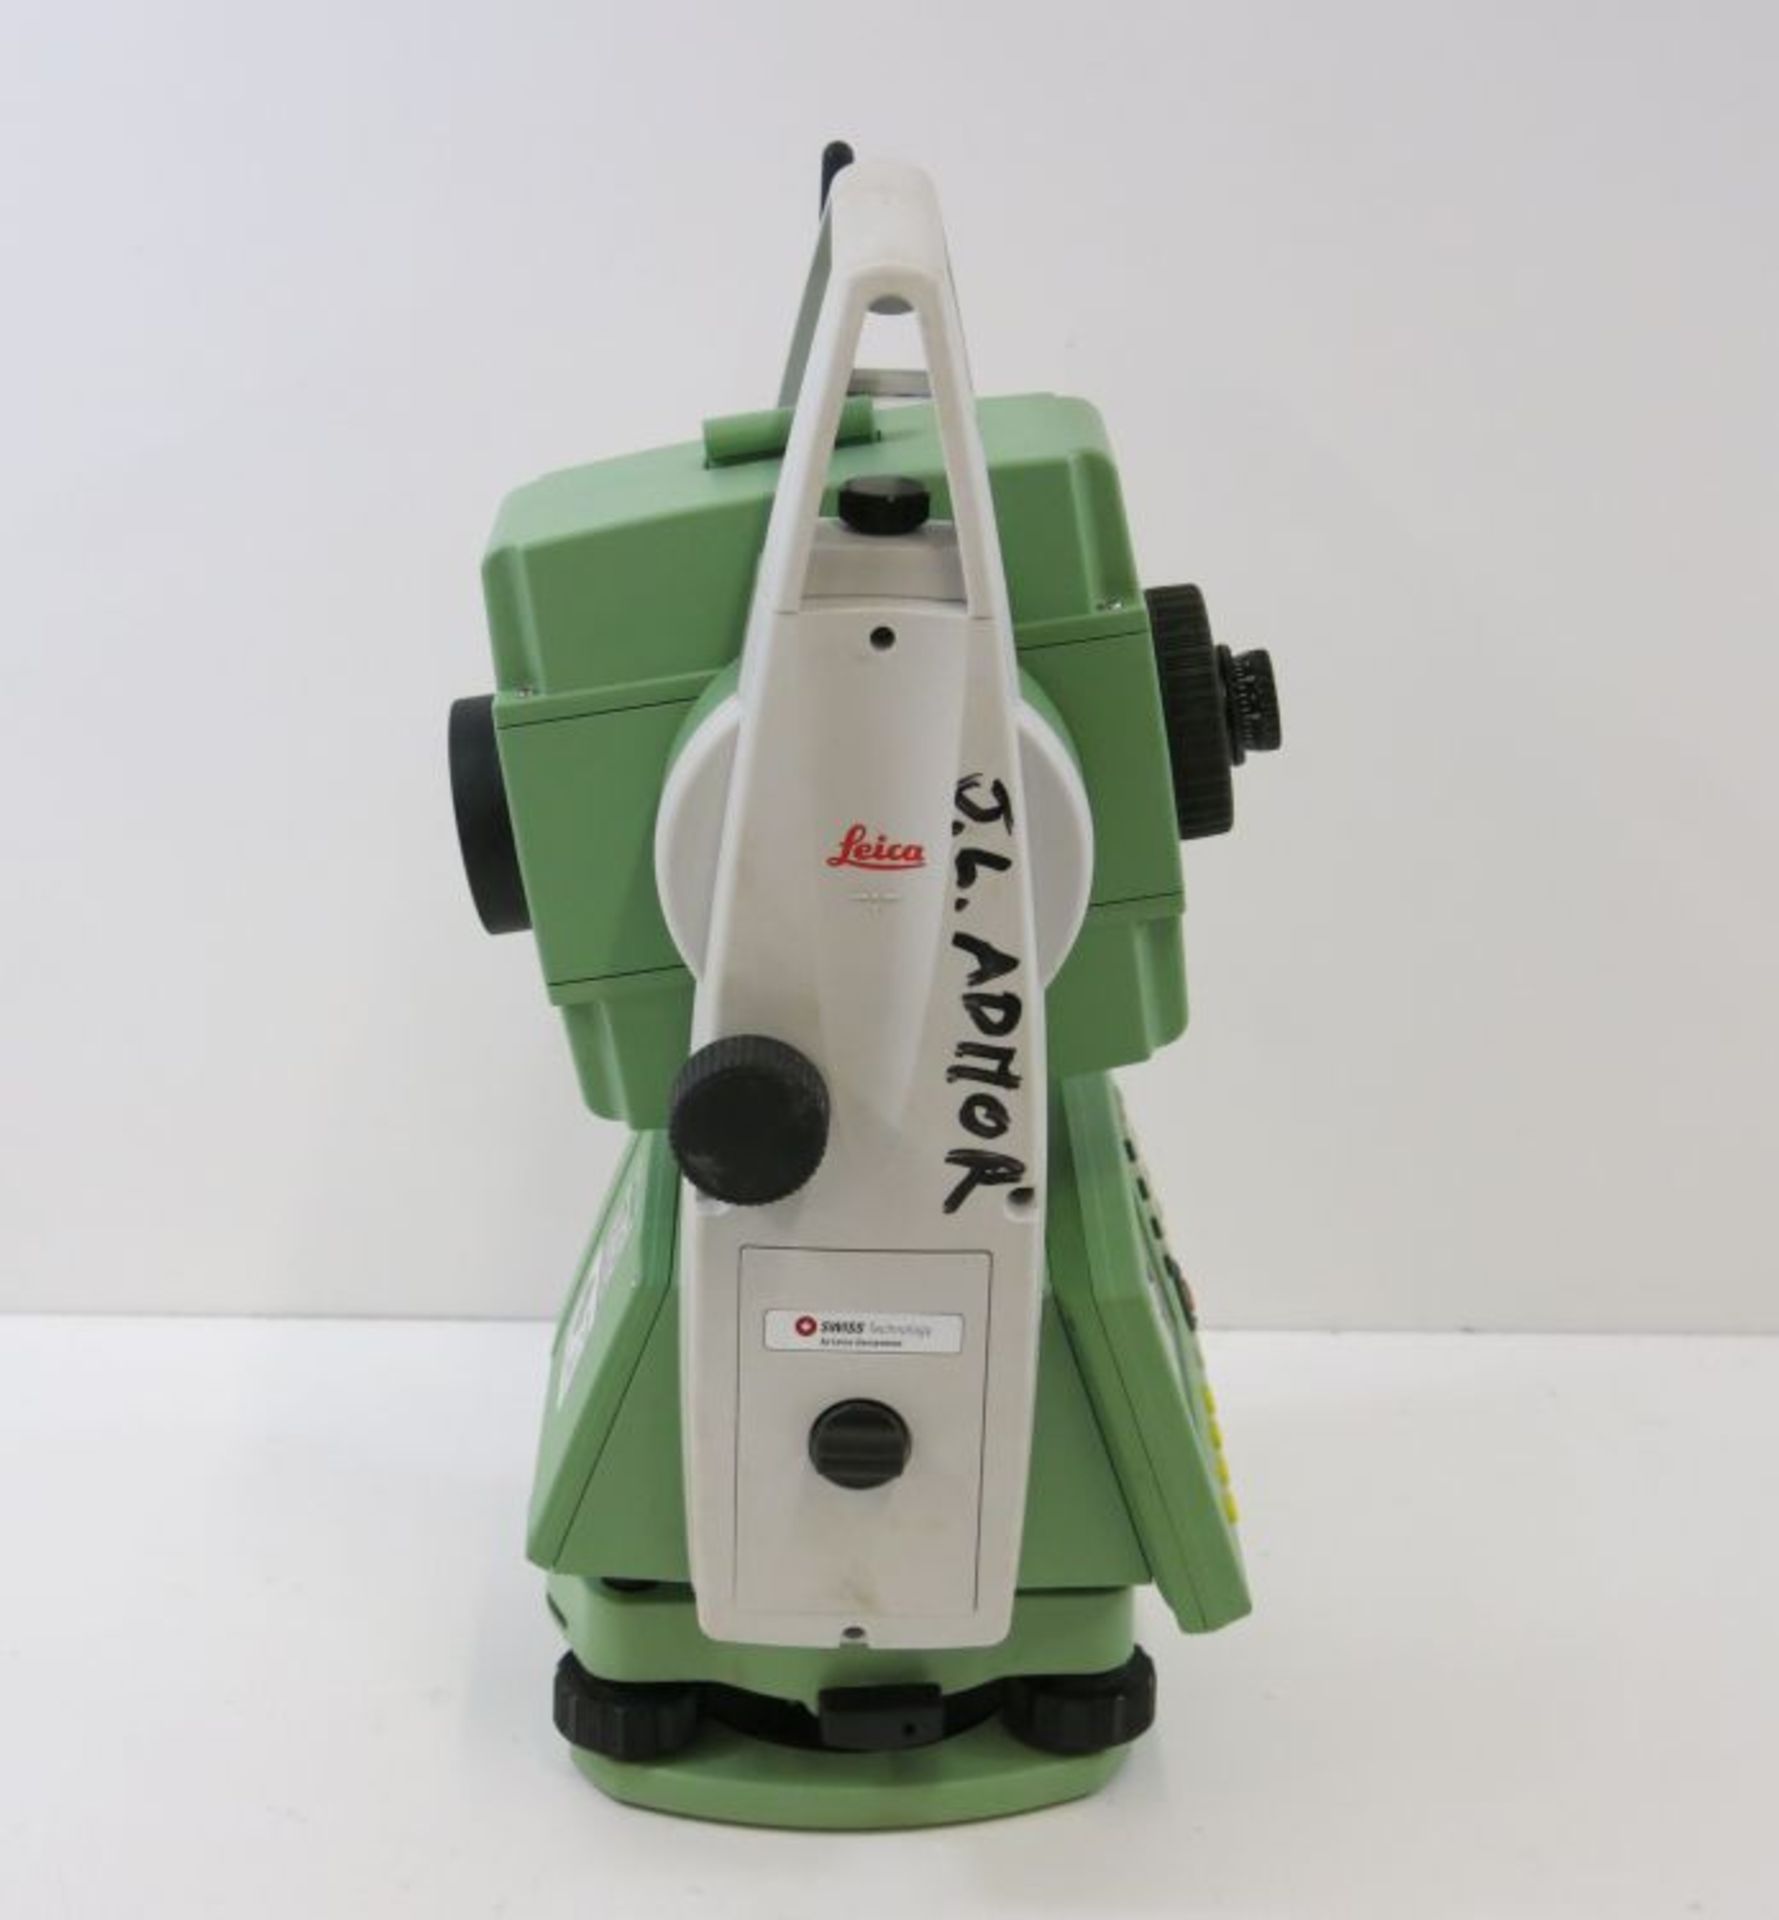 * Leica TS 06 Plus 7'' R500 Total Station Surveying Package comprising: Leica Flexfield TS 06 - Image 6 of 21